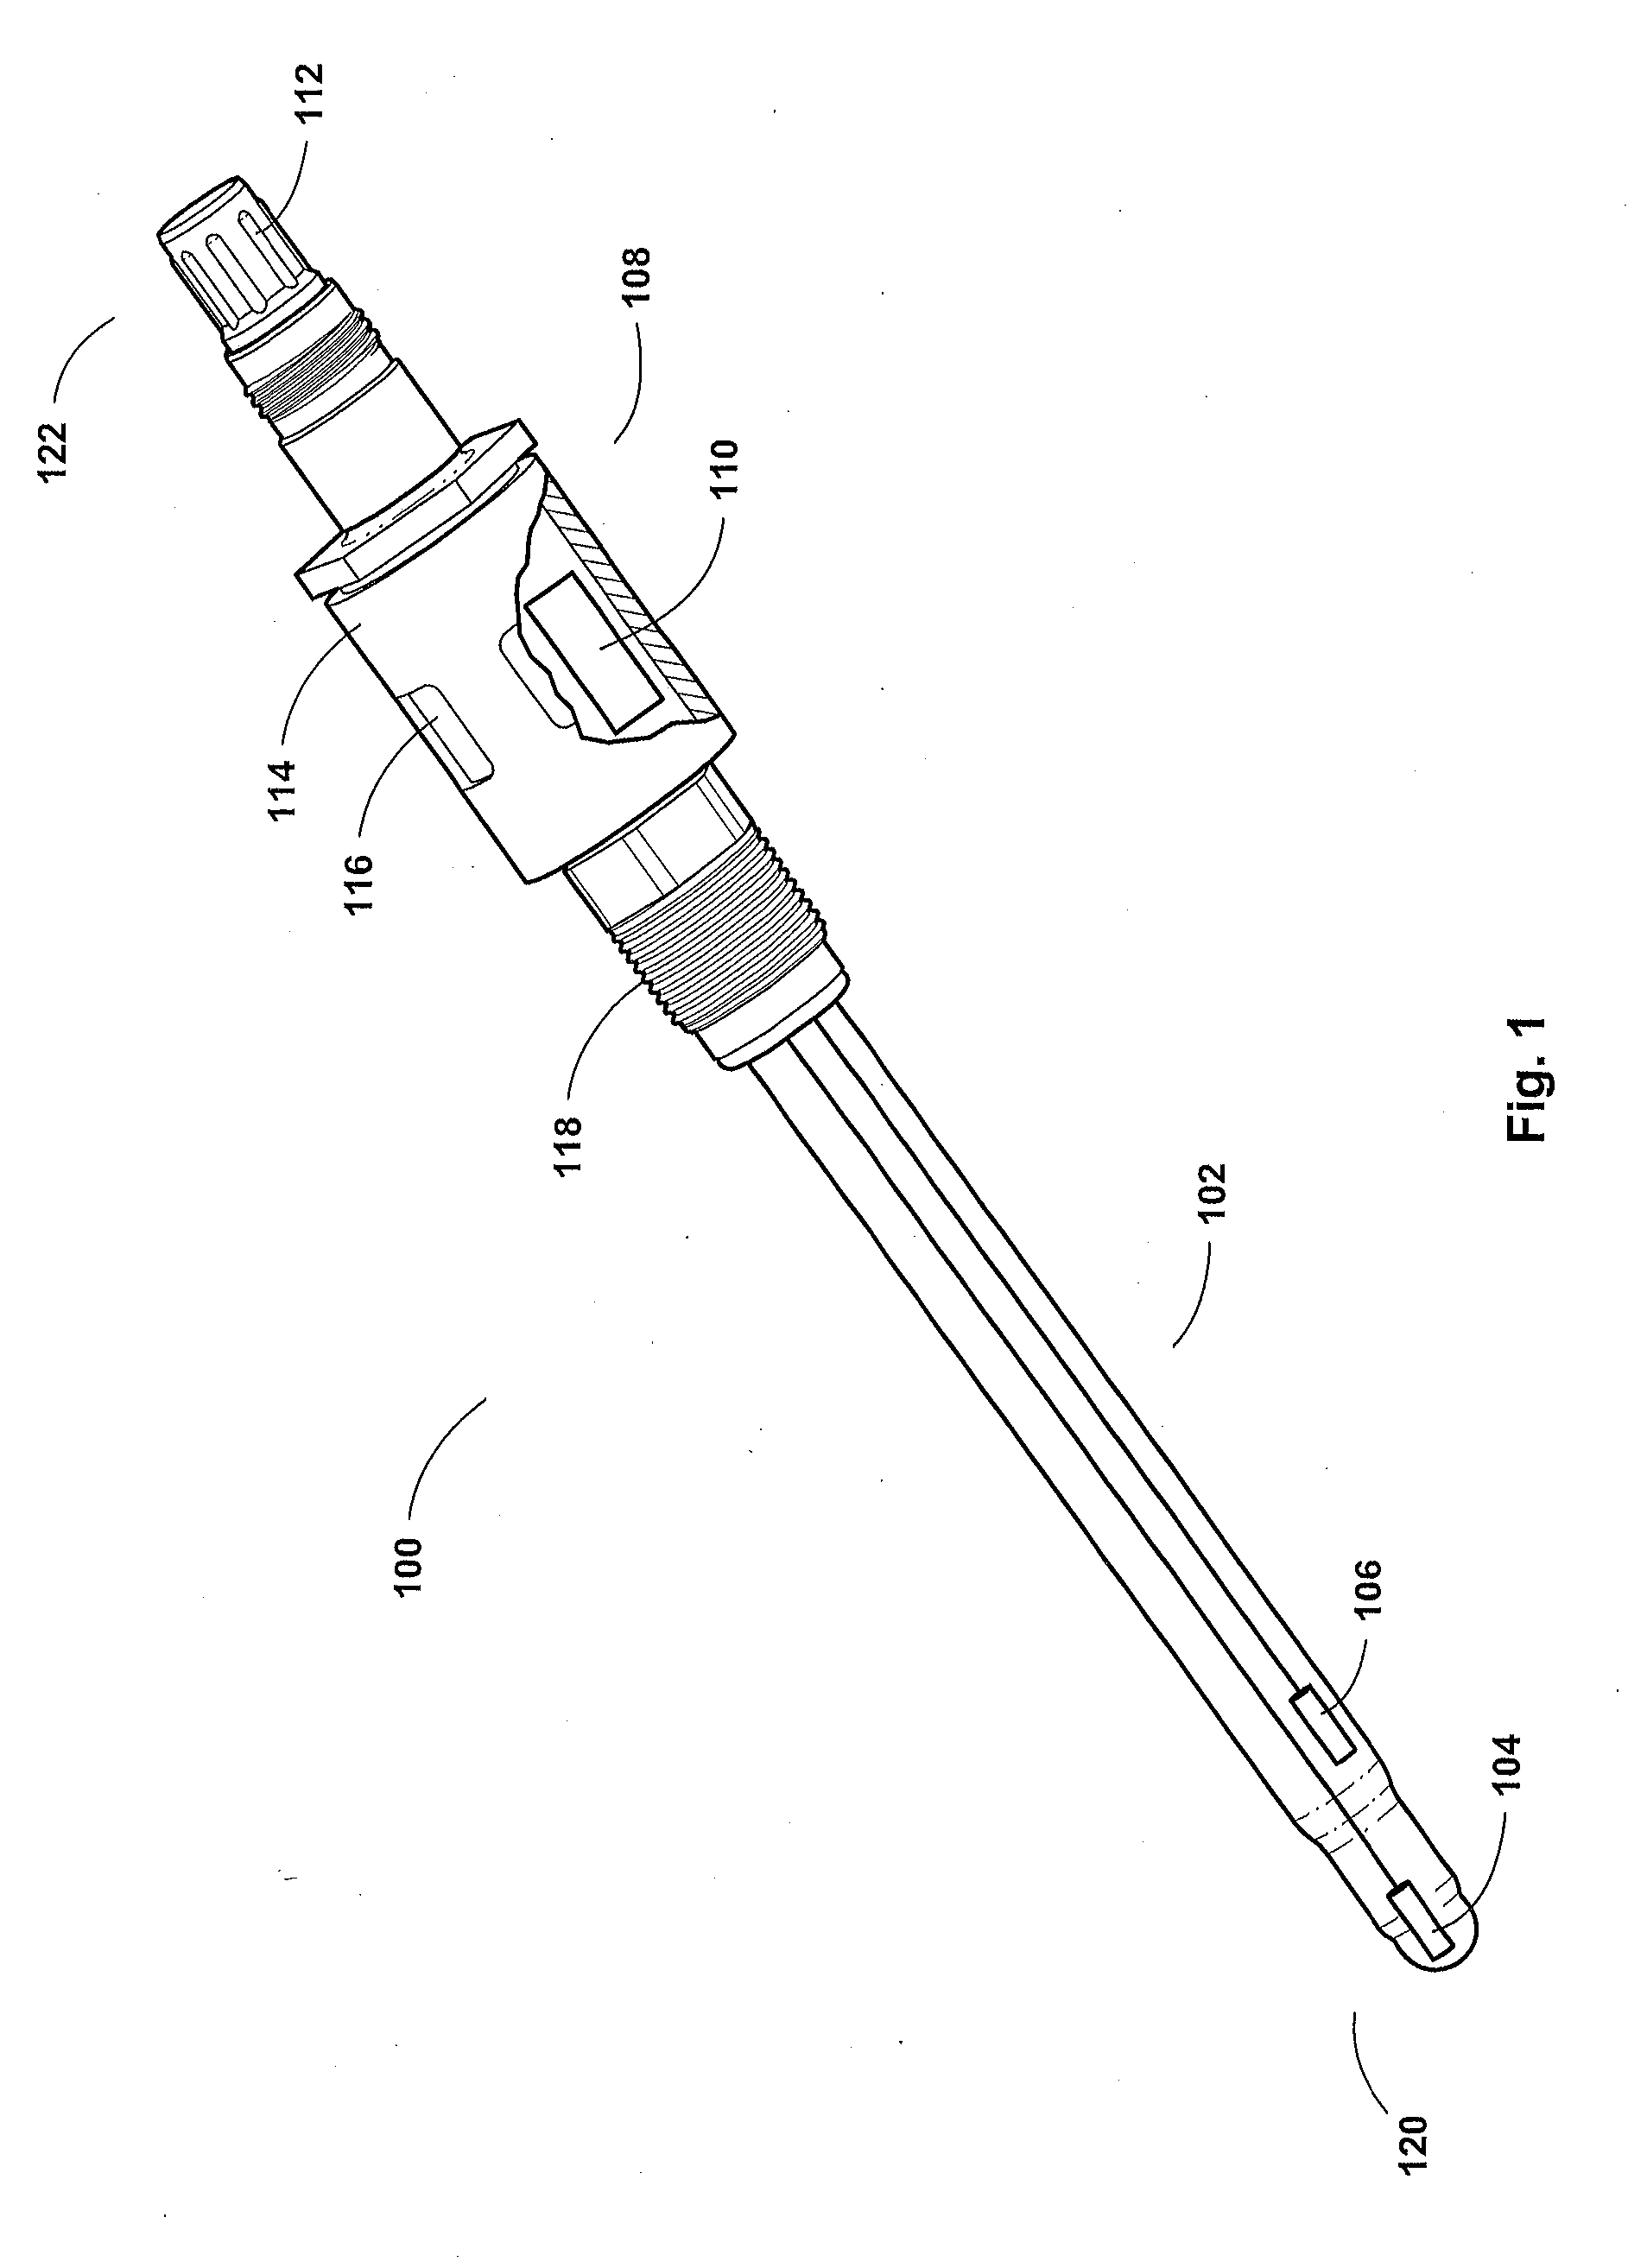 Measurement probe with heat cycle event counter